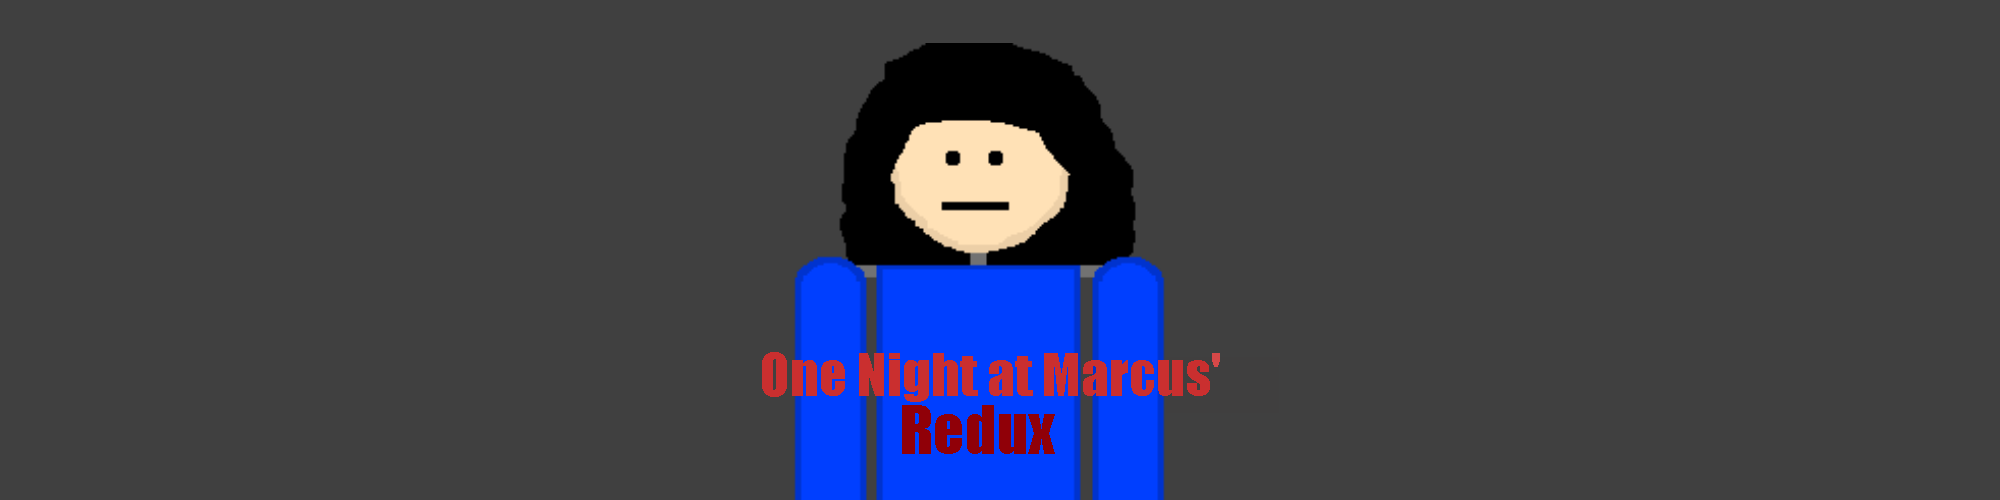 One Night at Marcus' Redux